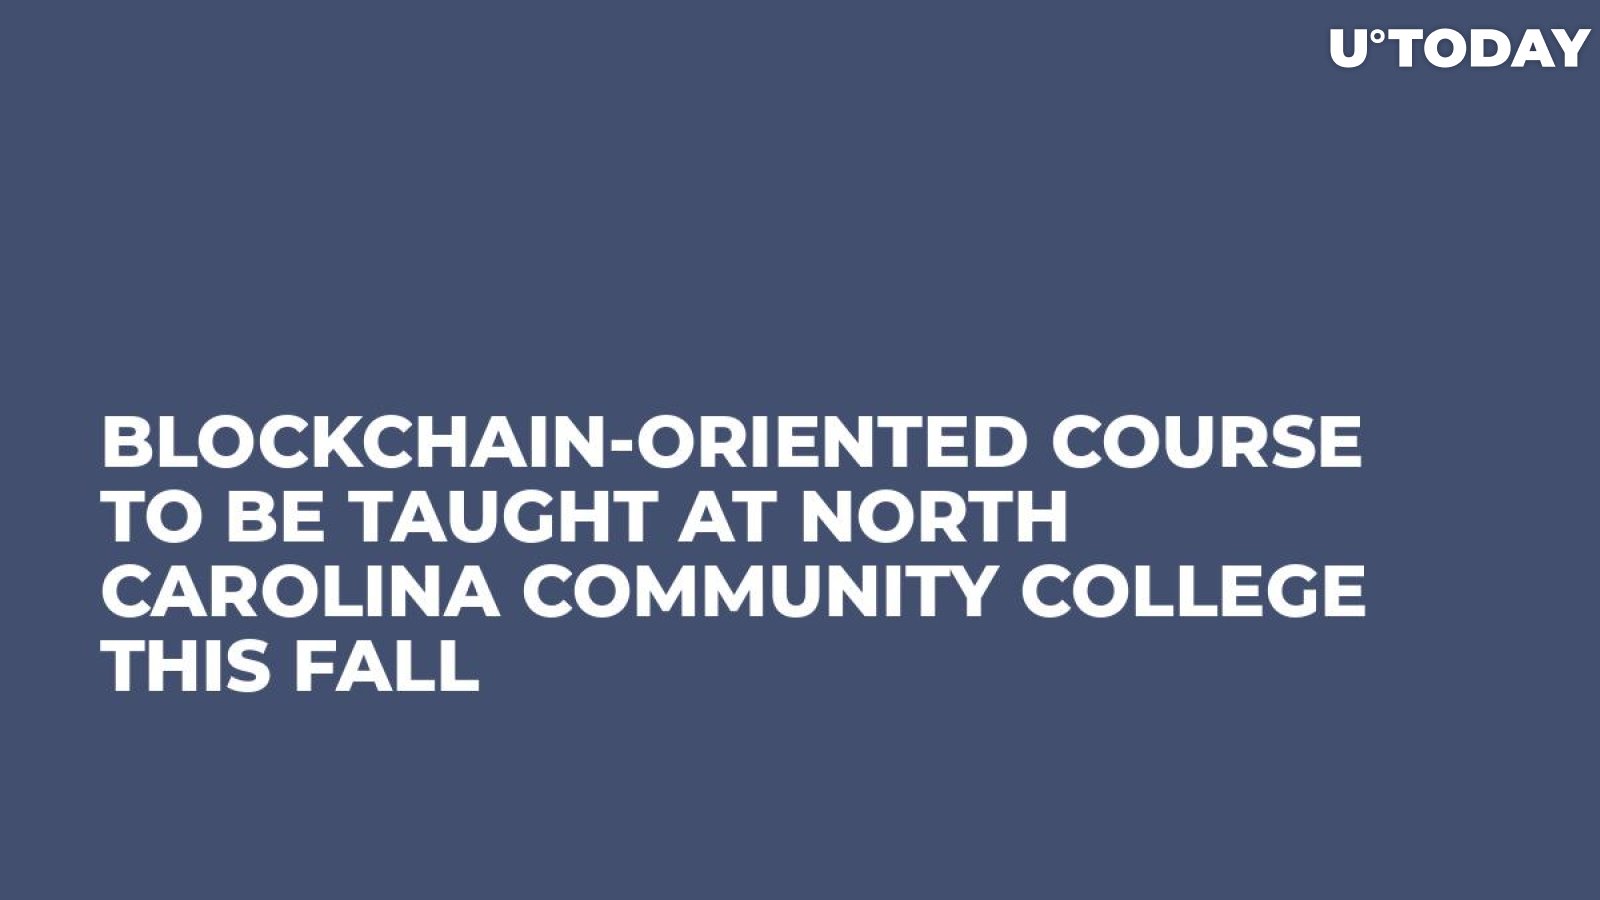 Blockchain-Oriented Course to Be Taught at North Carolina Community College This Fall